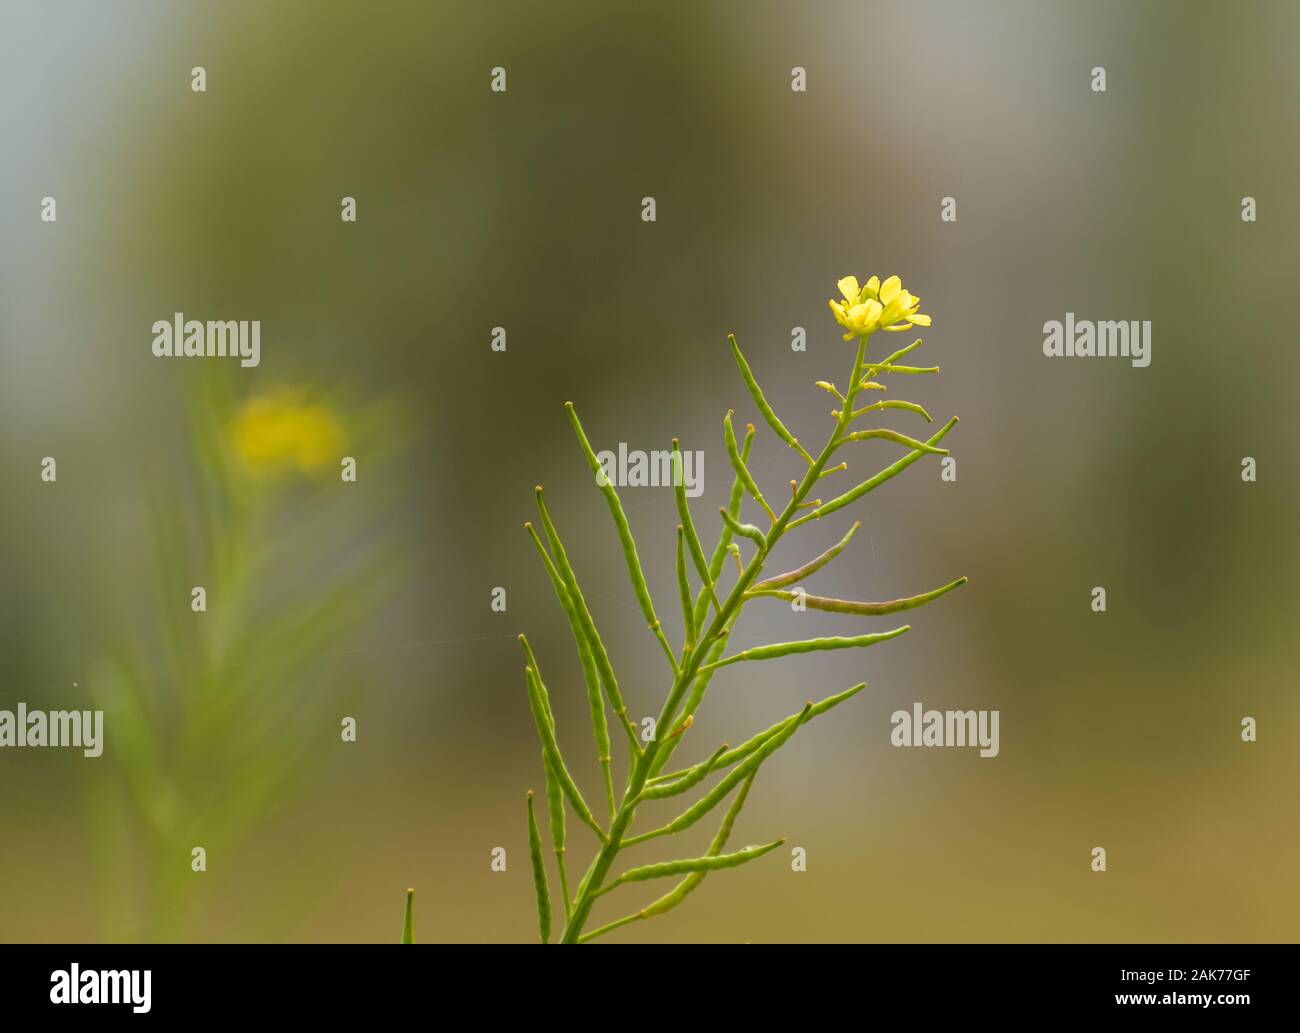 The yellow flowers of the Brassica spp, a plant that belongs to the mustard family, in a garden in the Himalayan village of Chaukori in Uttarakhand. Stock Photo